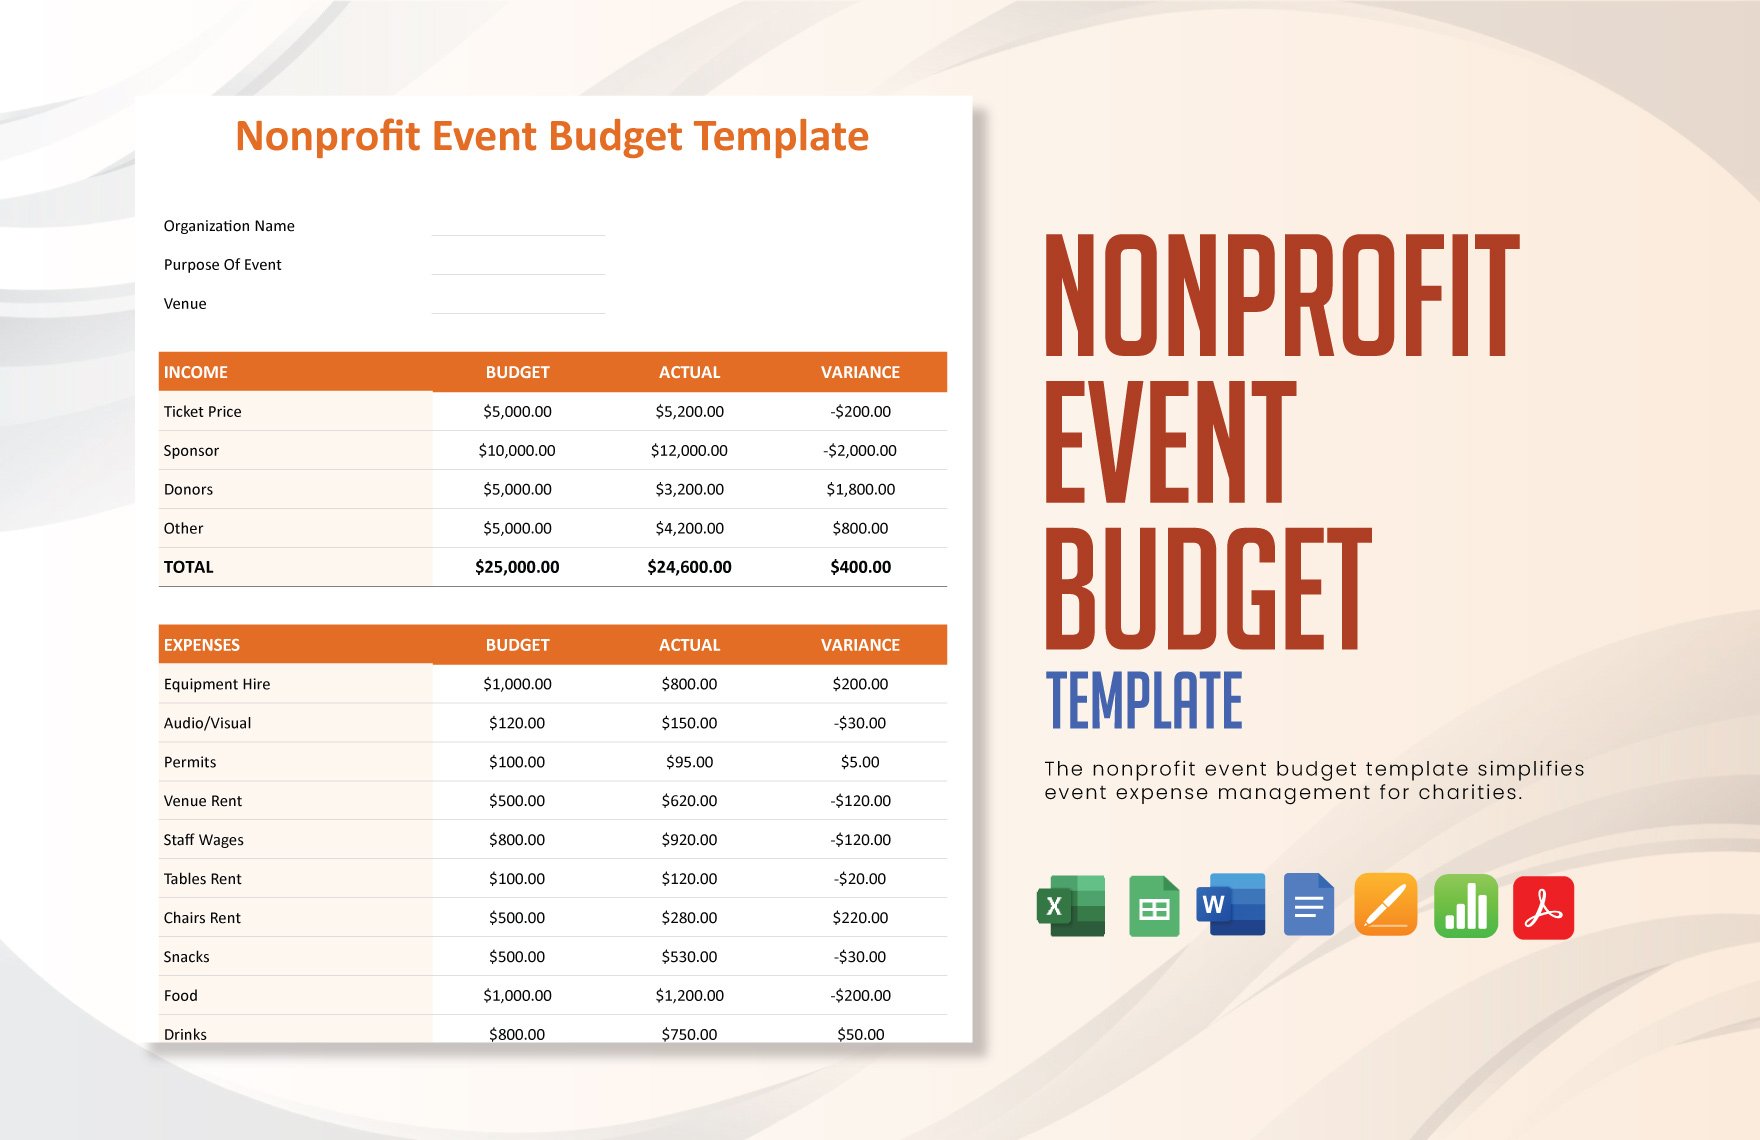 Nonprofit Event Budget Template in Word, Google Docs, Excel, PDF, Google Sheets, Apple Pages, Apple Numbers